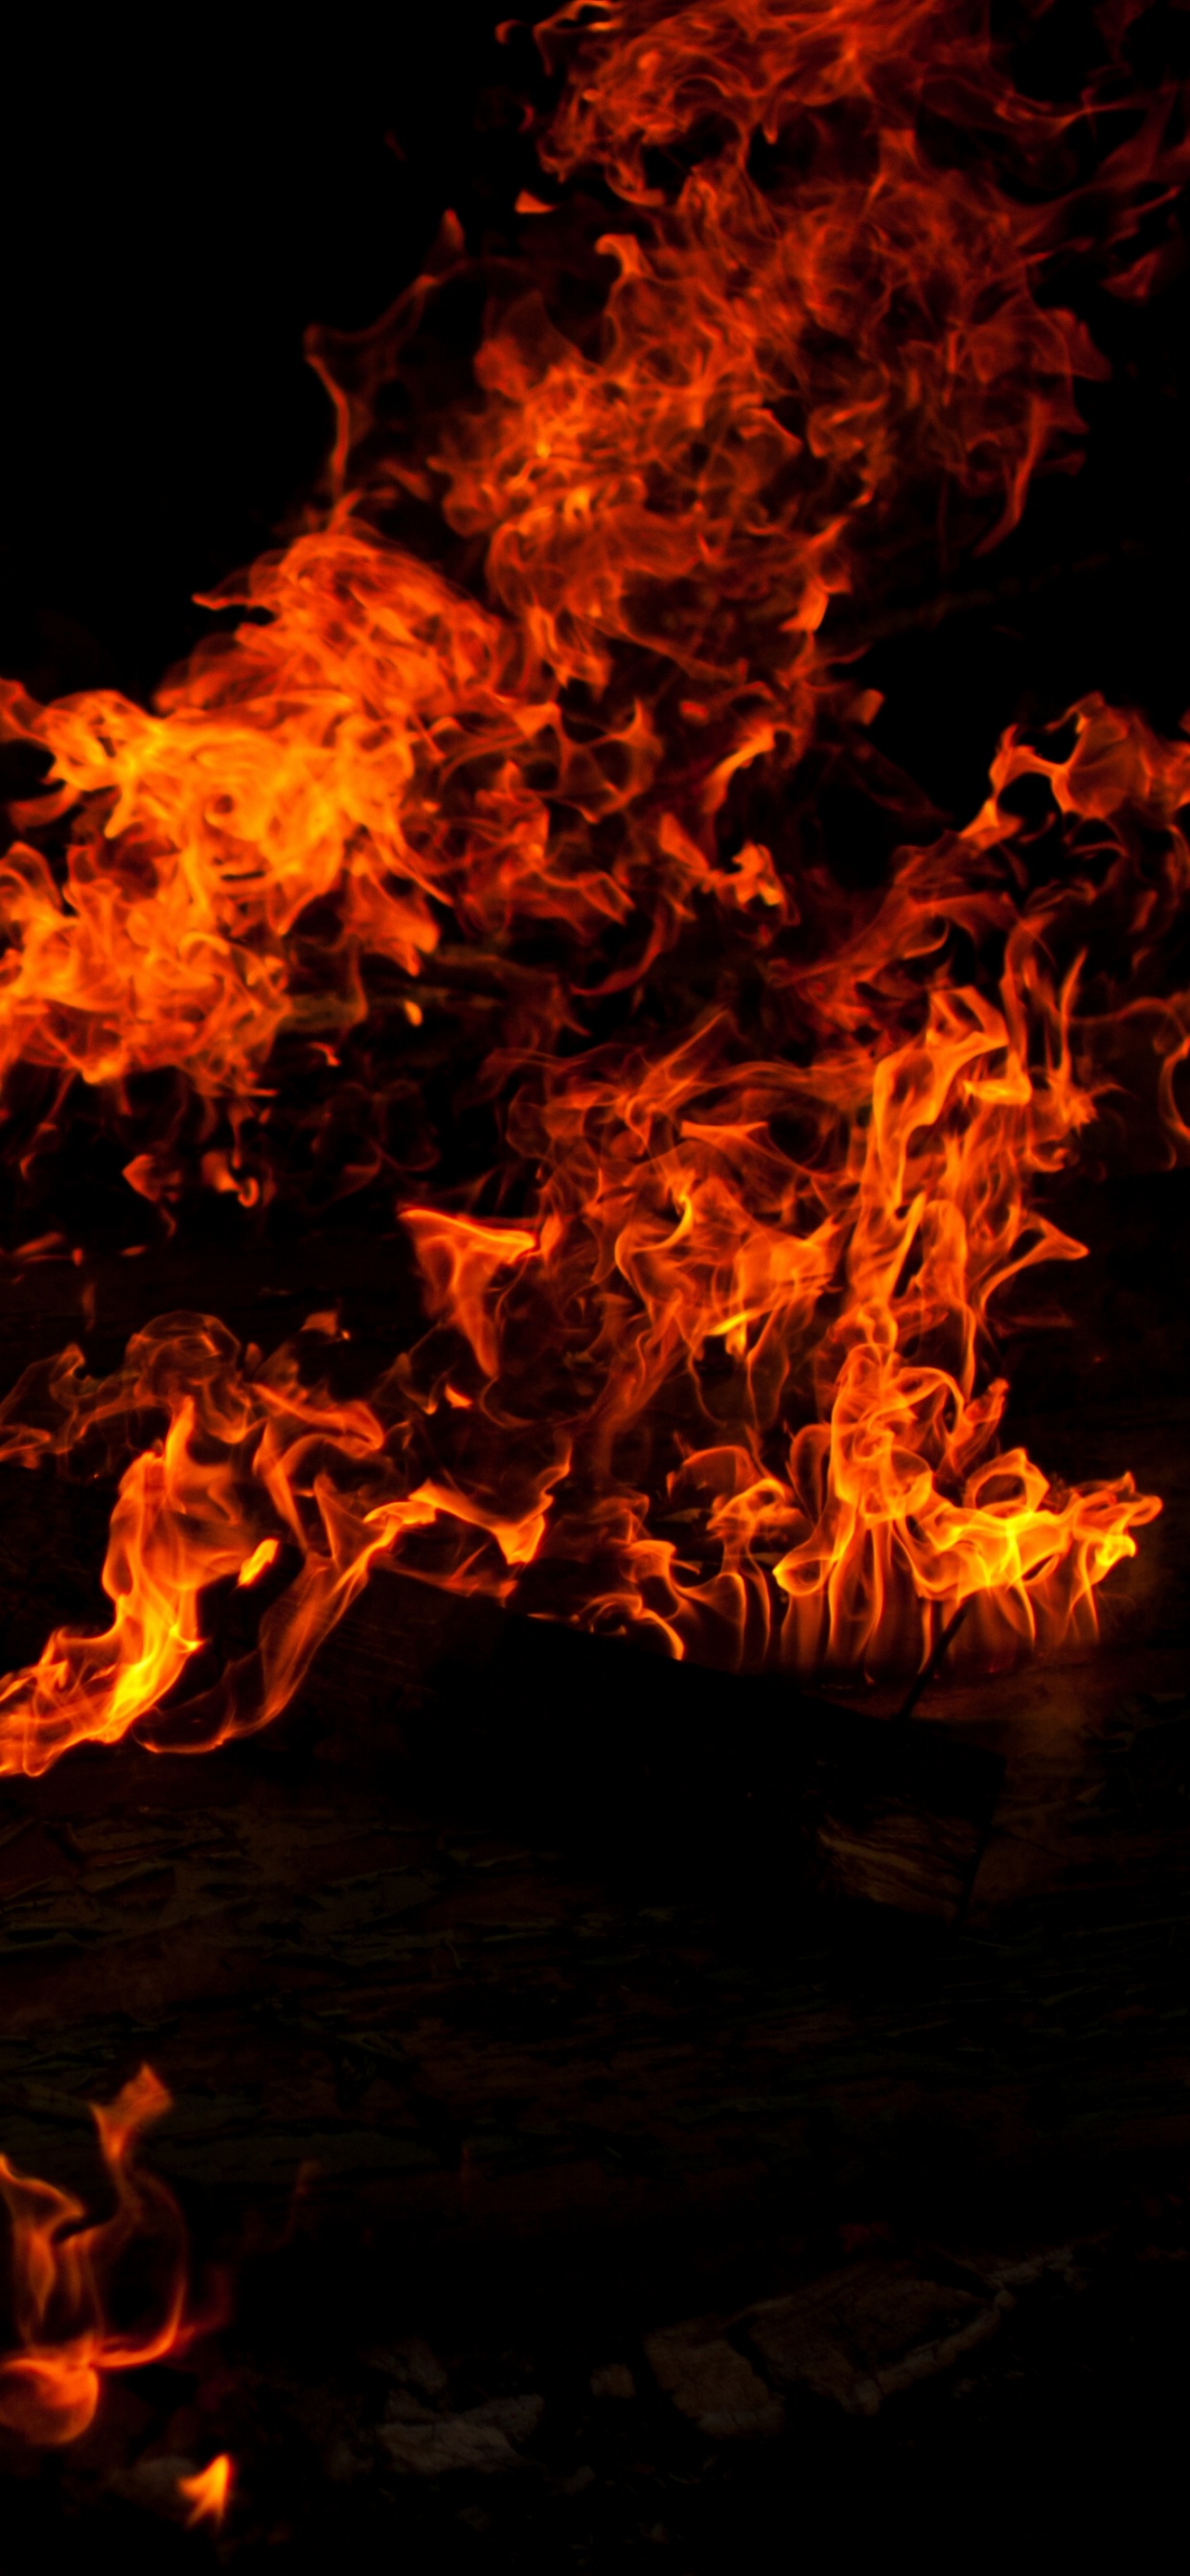 Fire on Fire During Night Time. Wallpaper in 1242x2688 Resolution